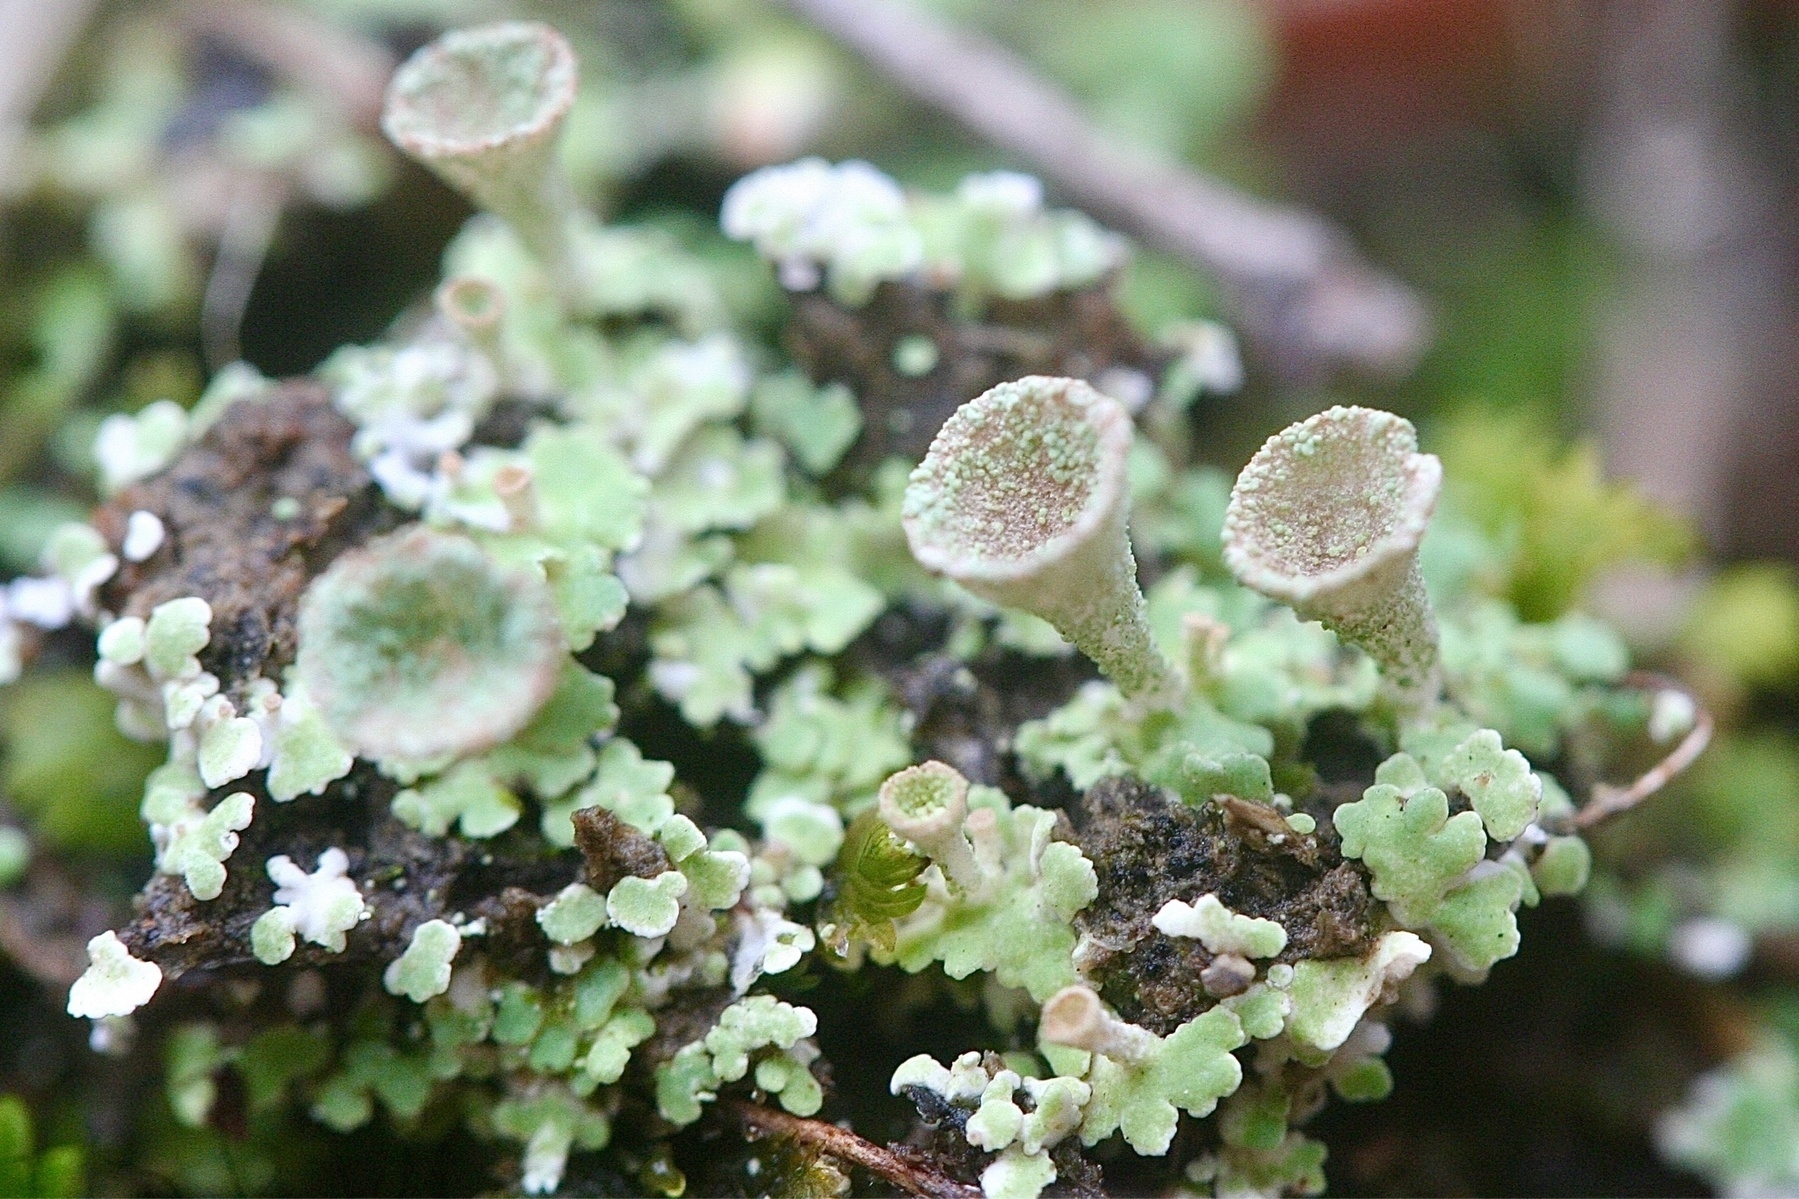  Upright, deep funnels of lichen that are pale green and speckled, growing from flater, smoother leaves